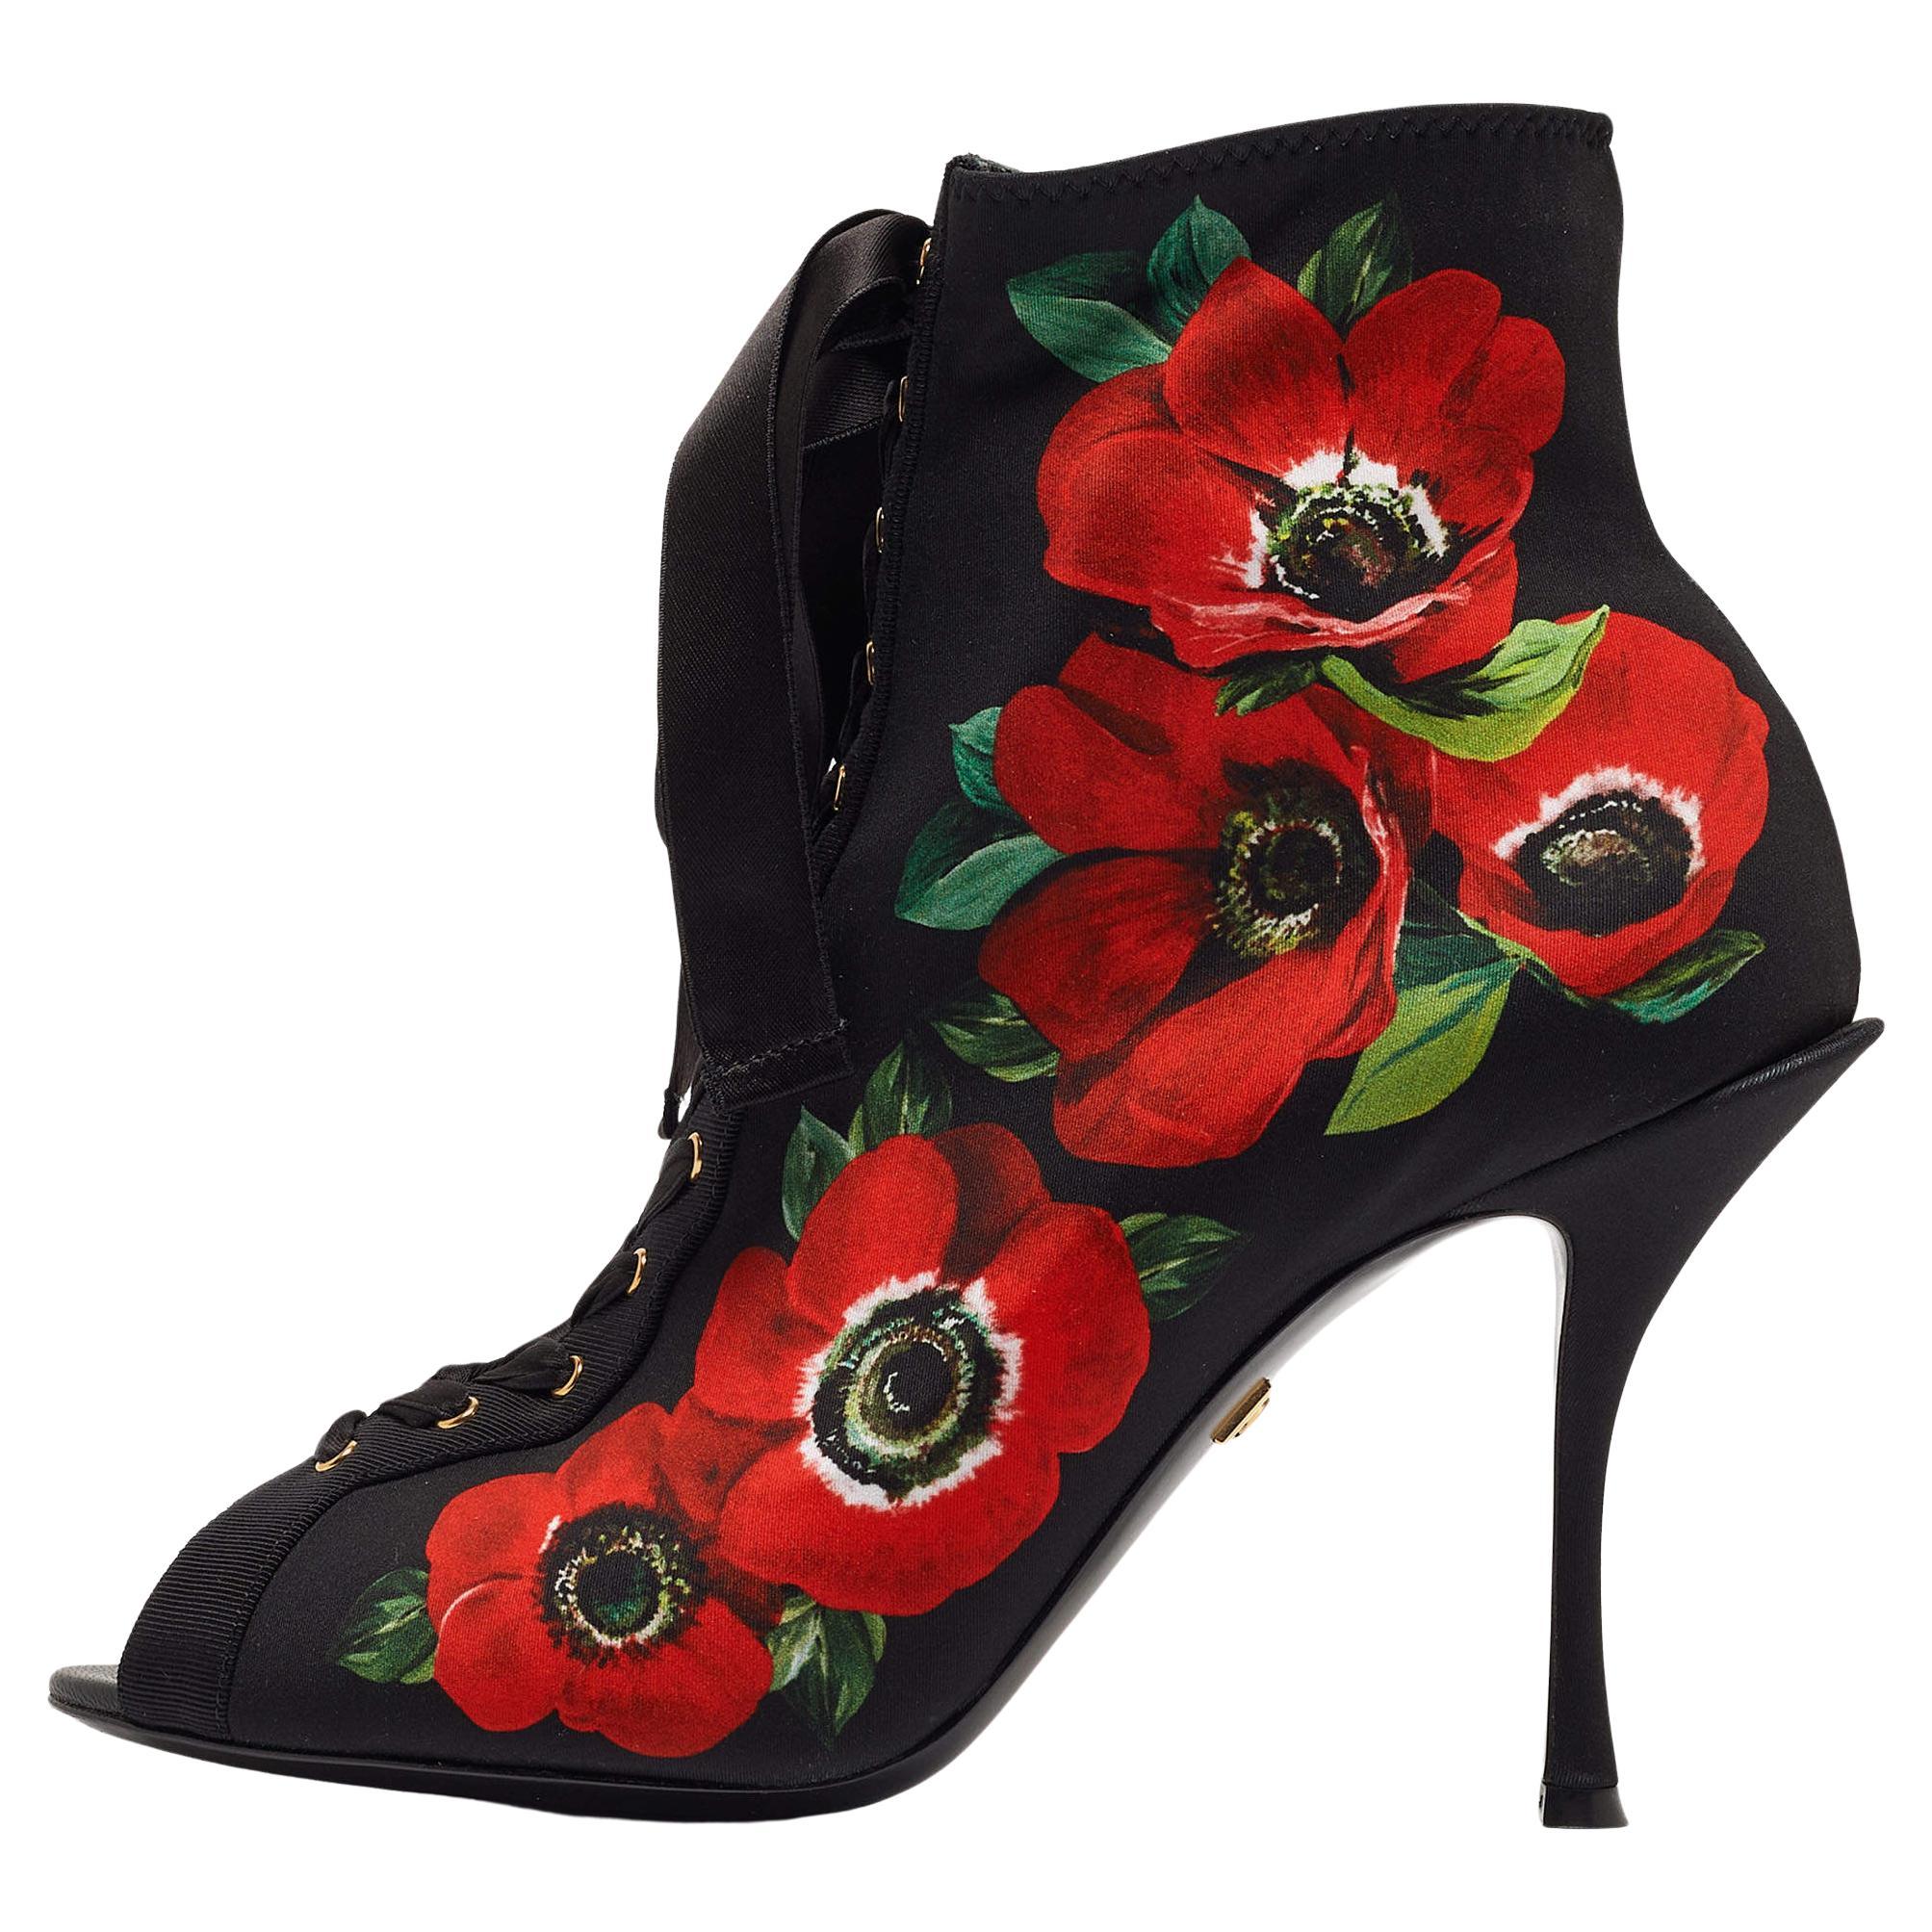 Dolce & Gabbana Floral Print Stretch Fabric Peep Toe Ankle Booties Size 39 For Sale